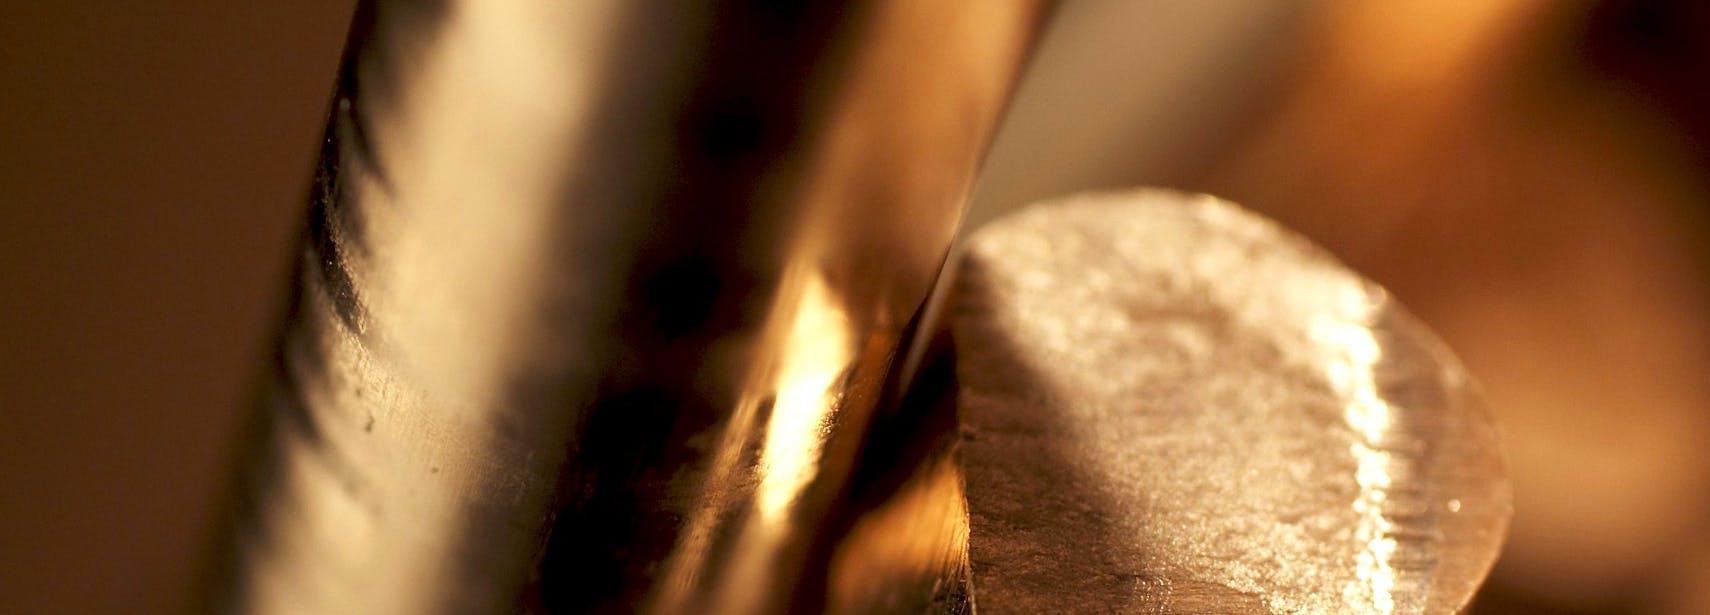 State-of-the-art foundry to cast its own gold, created in the early 2000s.